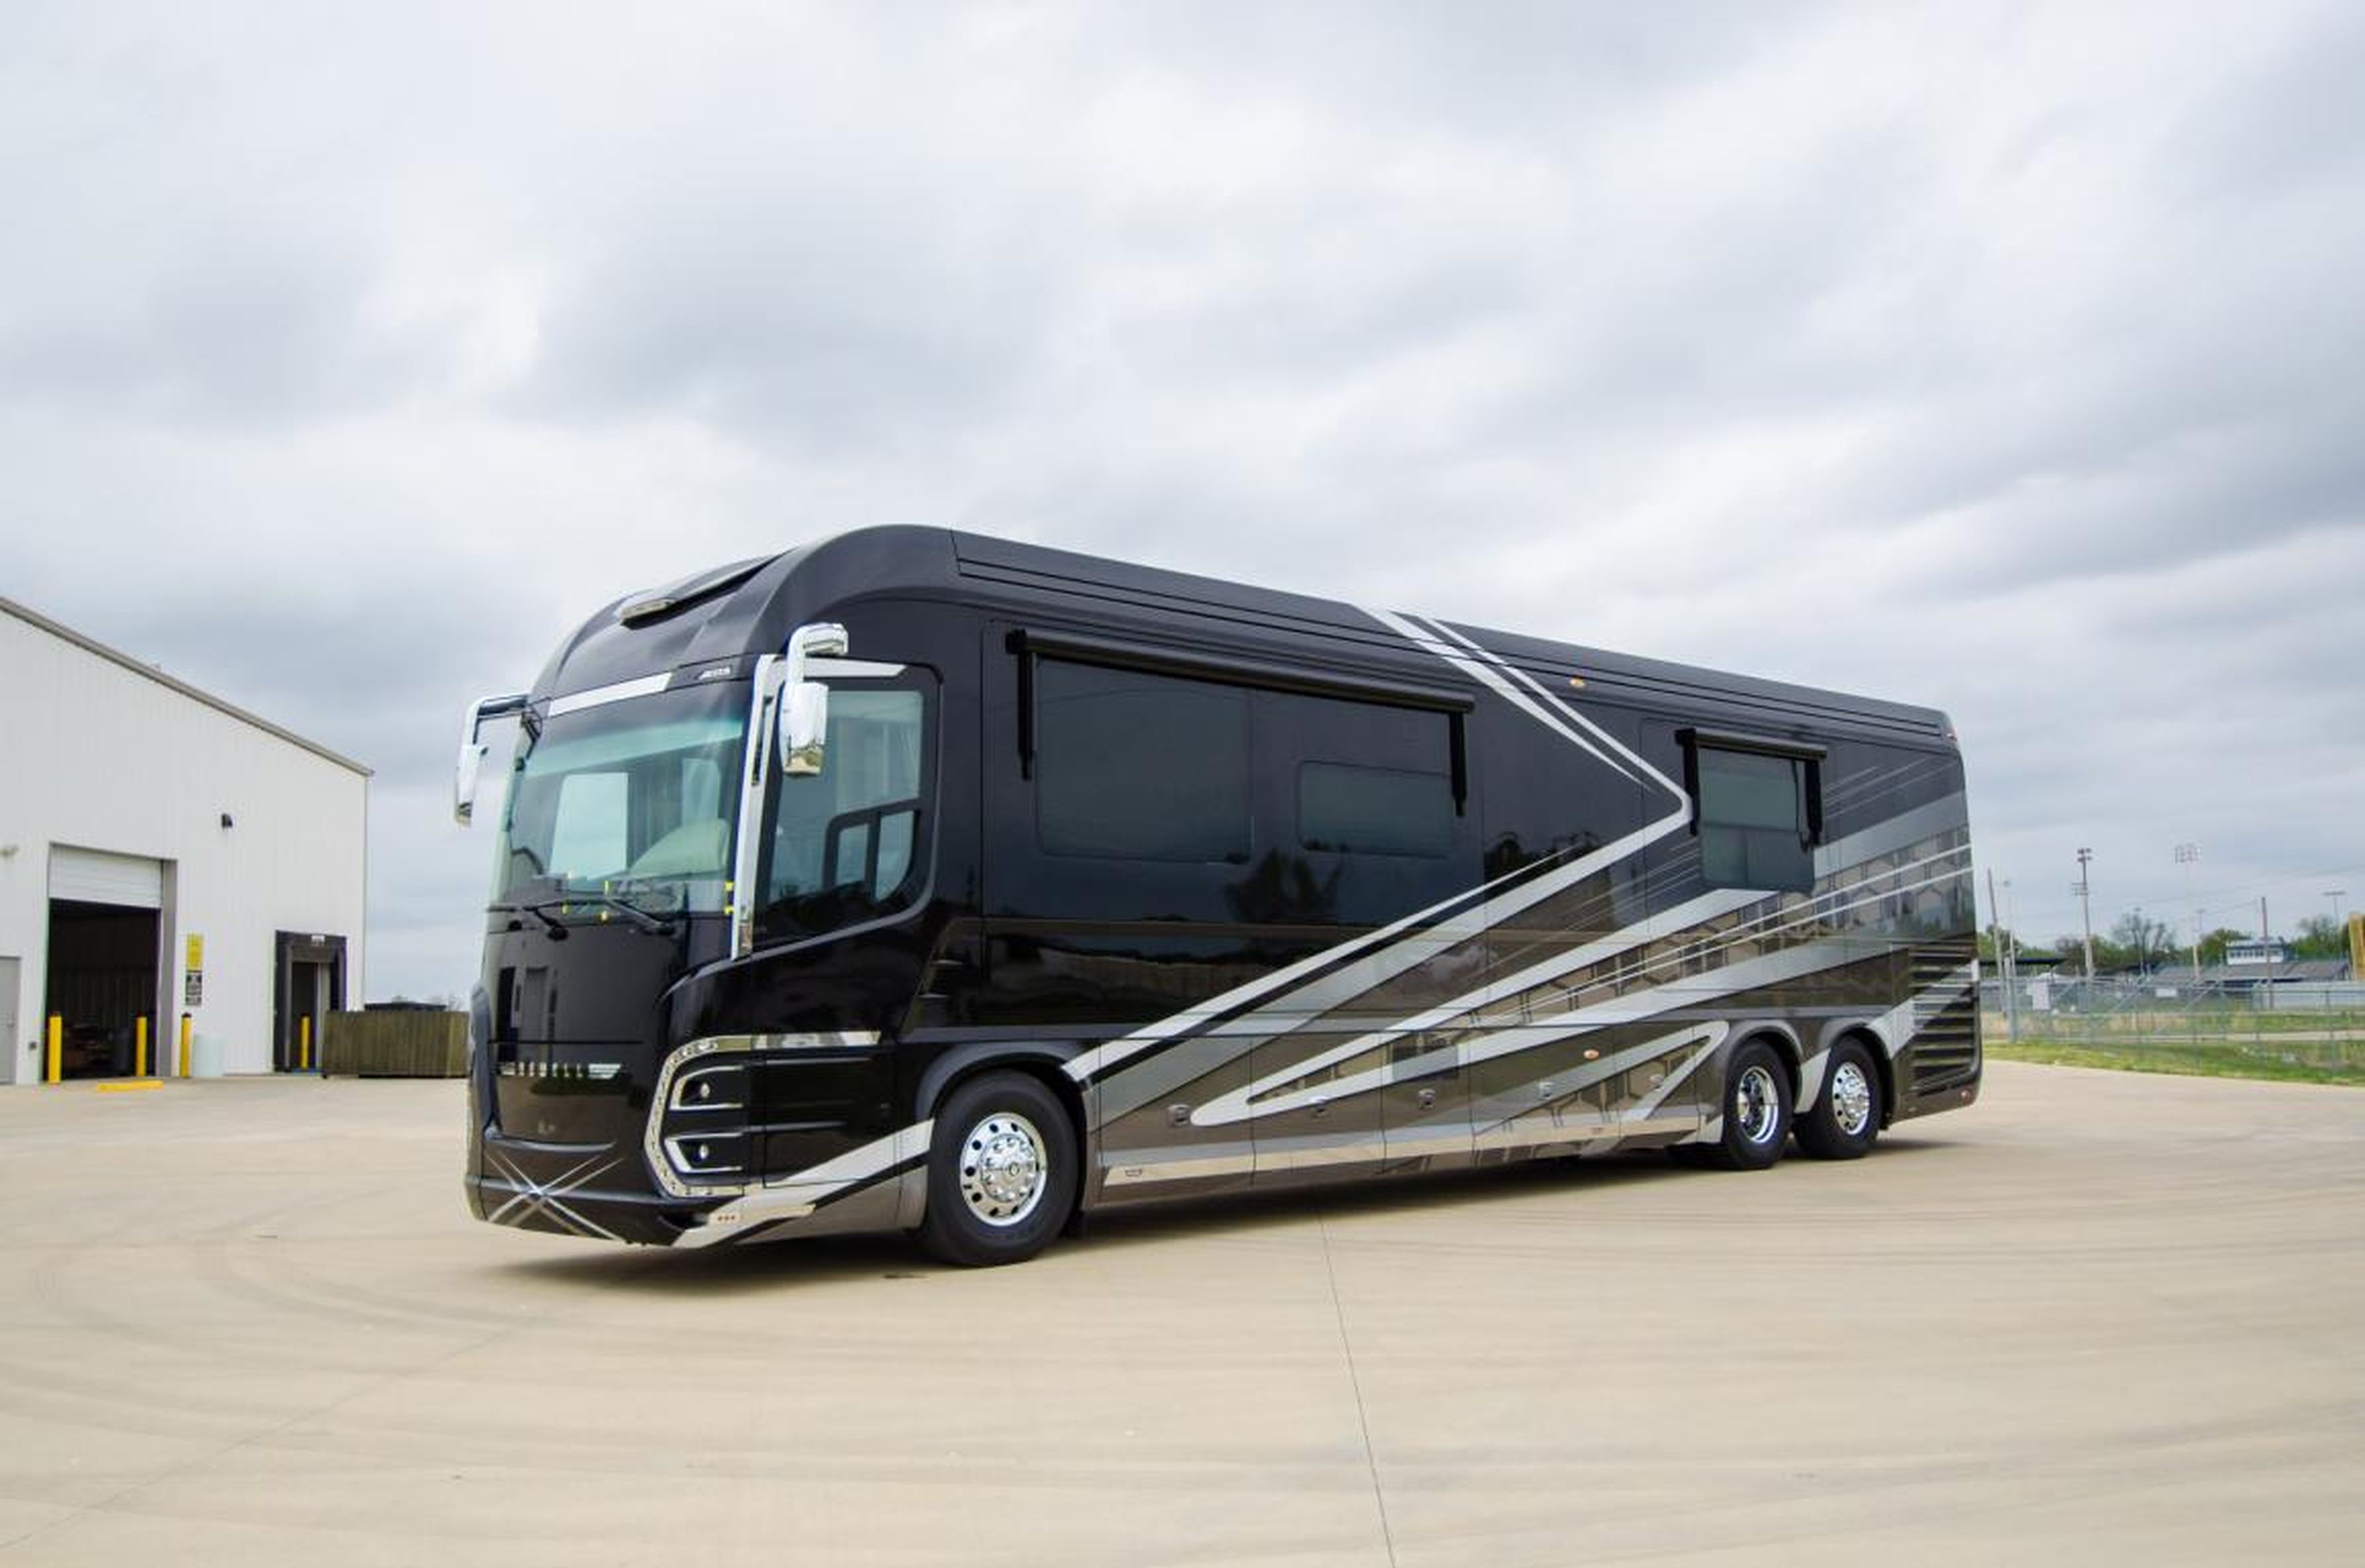 The 2020 Newell Coach p50.